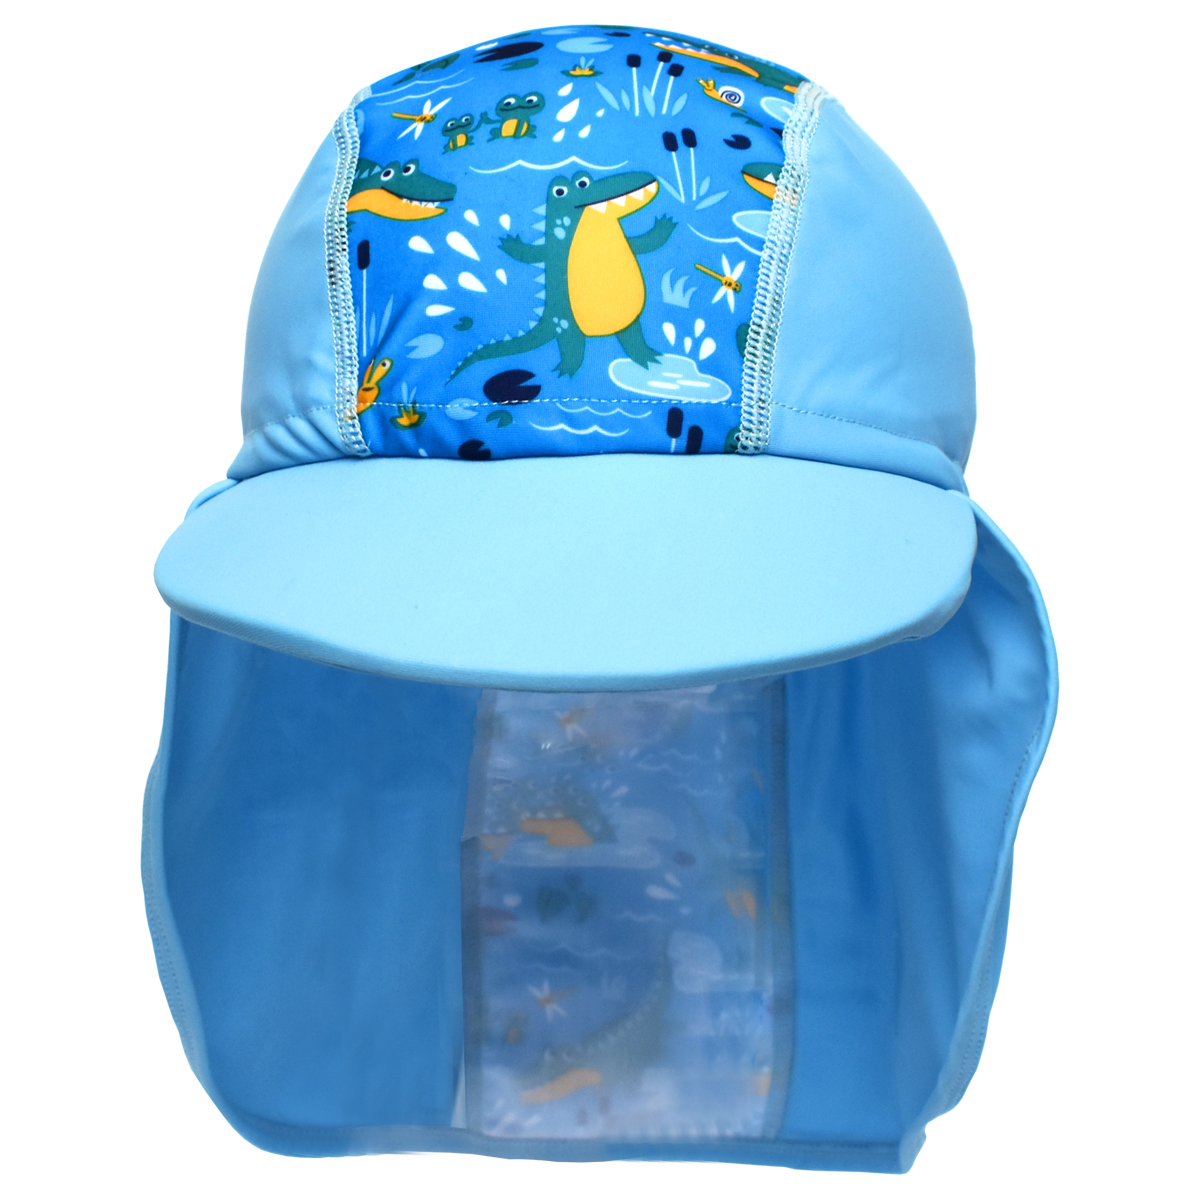 Legionnaire style sun hat in light blue and blue, with swamp themed print panel including crocodiles, frogs, fireflies and more. Front.